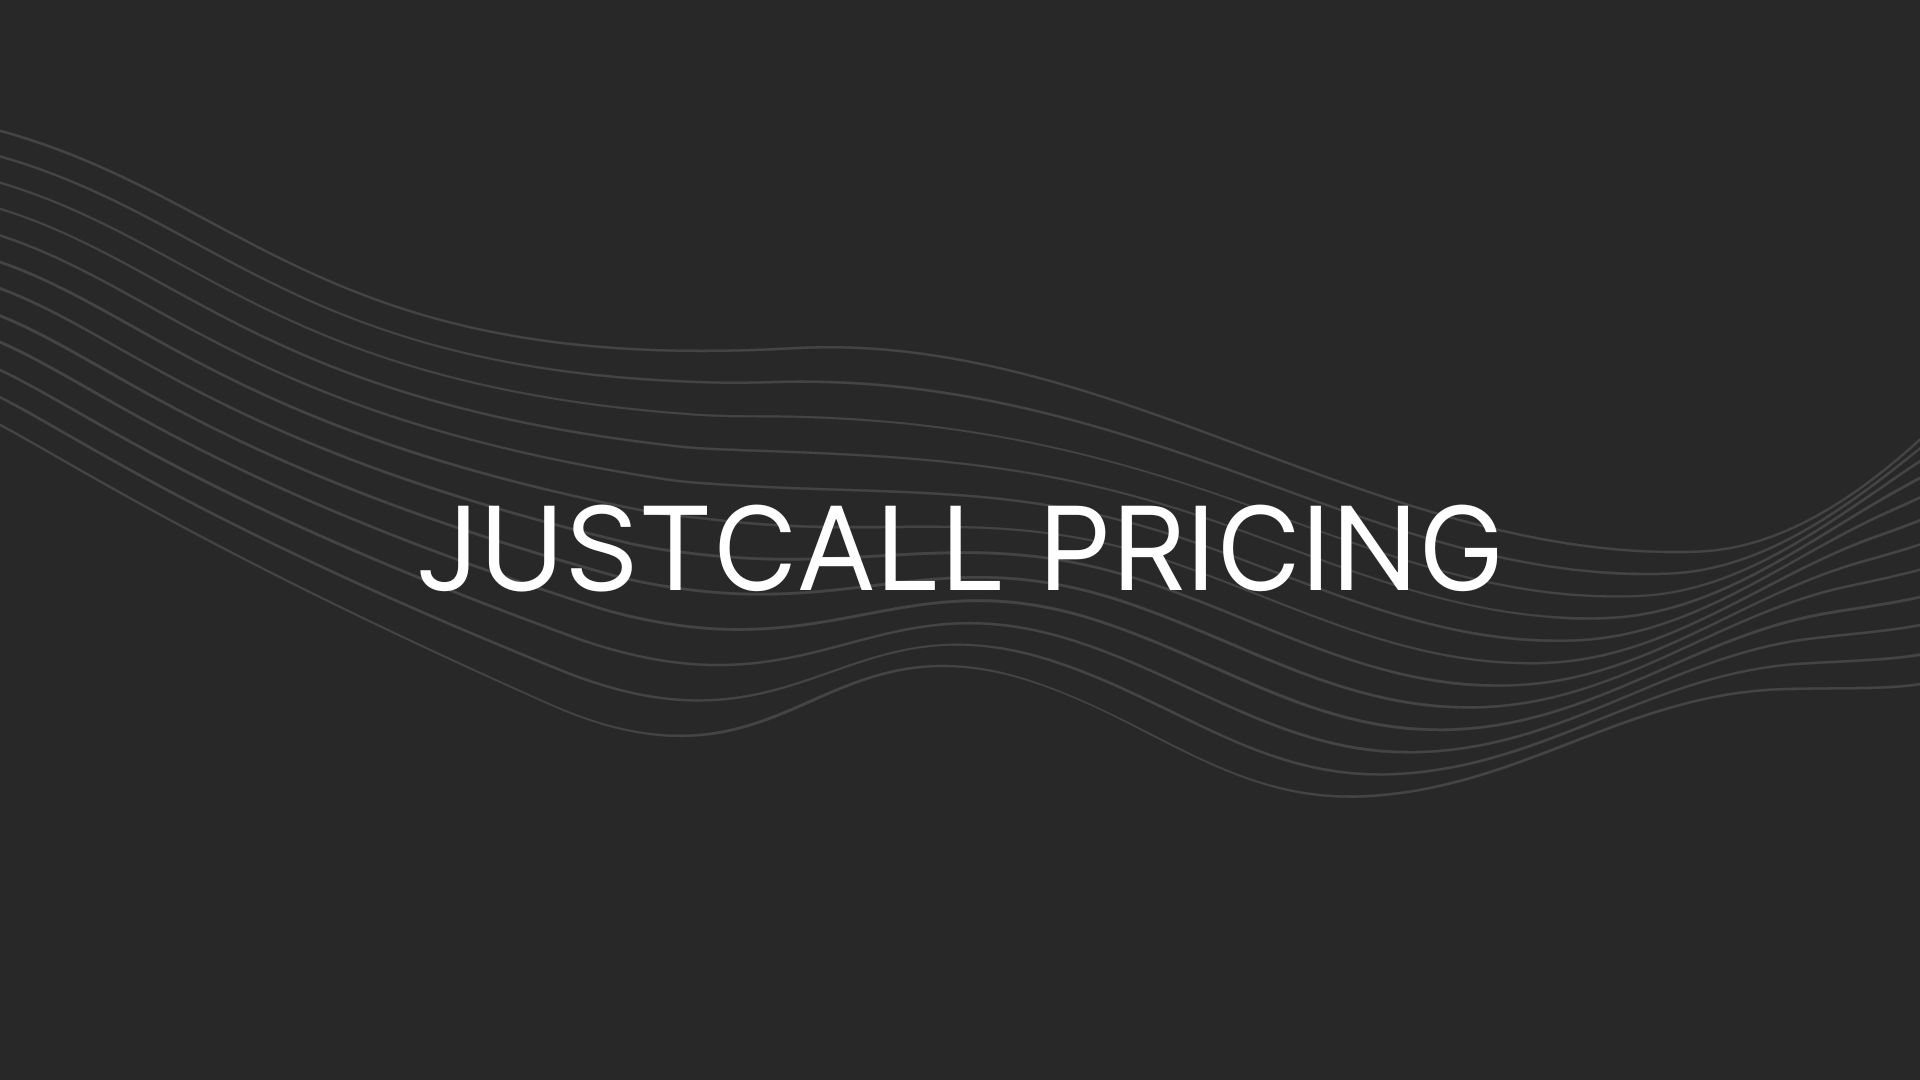 JustCall Pricing